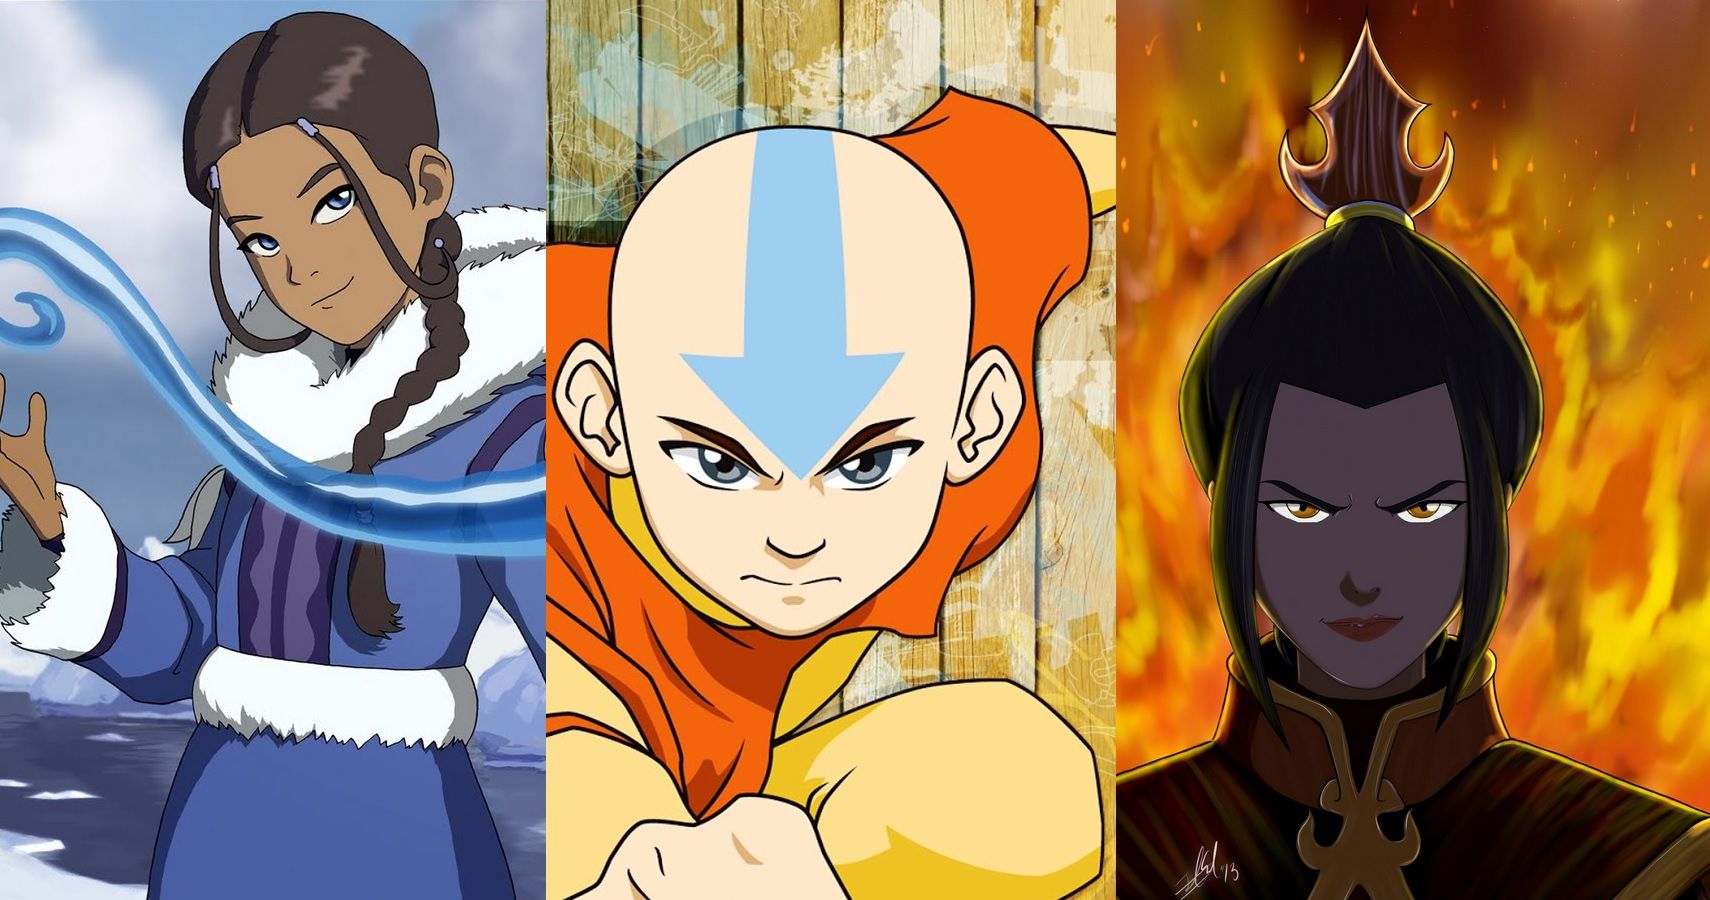  Avatar Astrology Libra Aang  Seeing from both sides in order to give  fair judgment the Avatar himself  Give a doub  Zodiac characters Anime  zodiac Zodiac